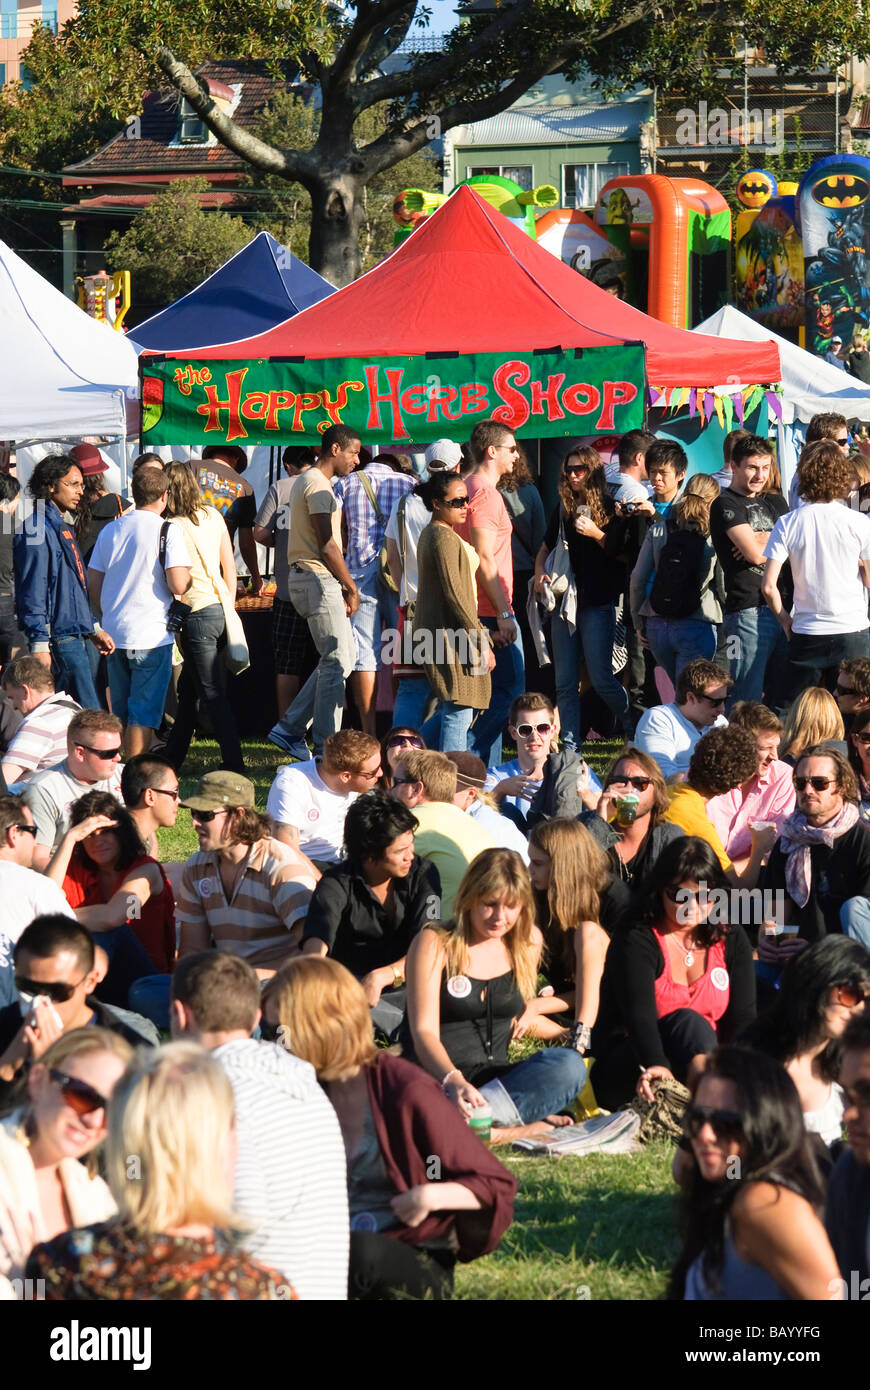 Community festivals, popular with young people, are held in city suburbs and towns throughout Australia. Stock Photo